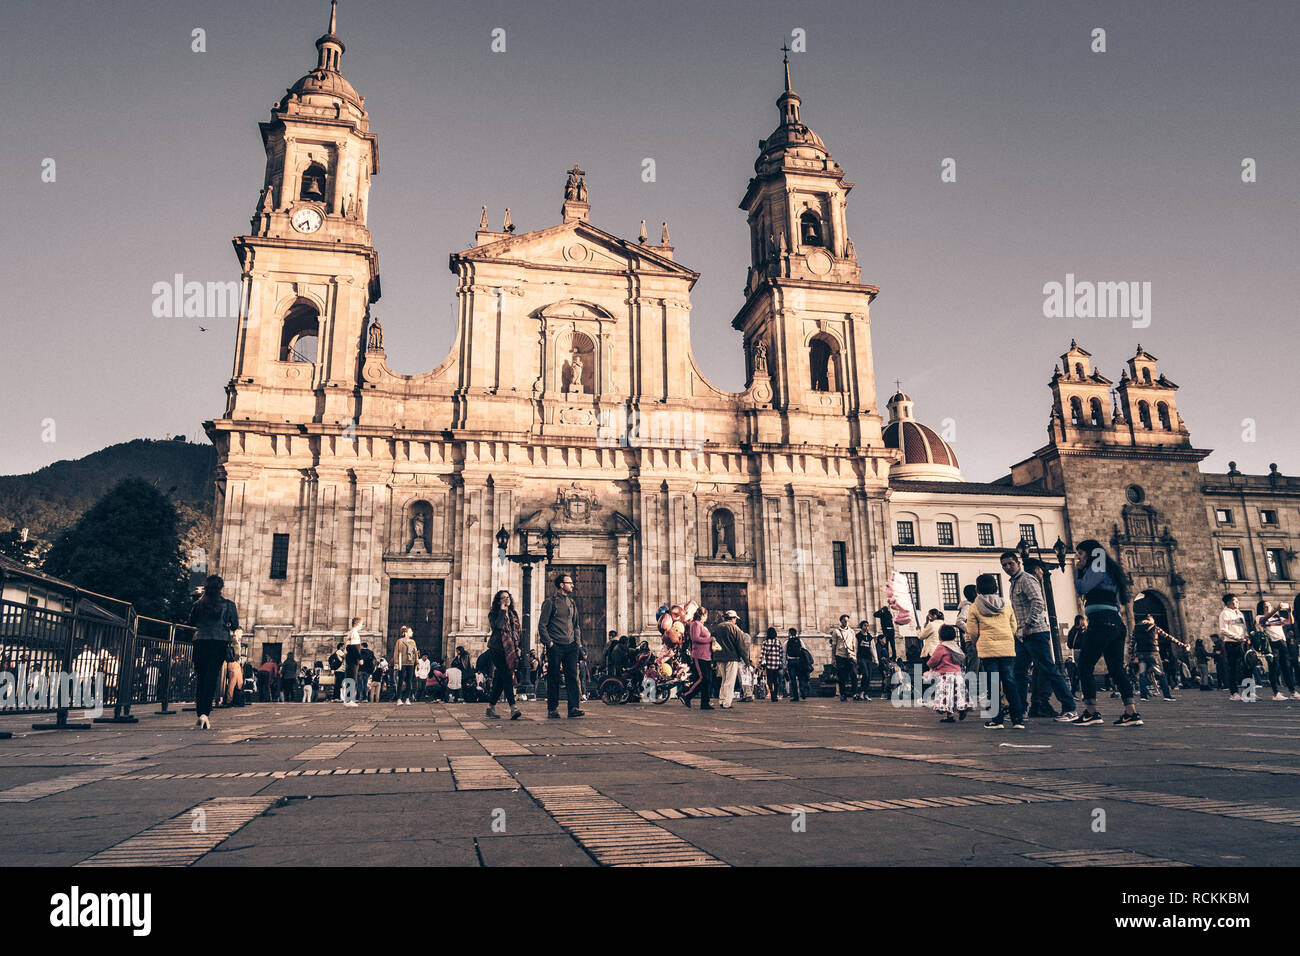 Metropolitan Cathedral Basilica of the Immaculate Conception in plaza de Bolivar, Bogota, Colombia. Stock Photo